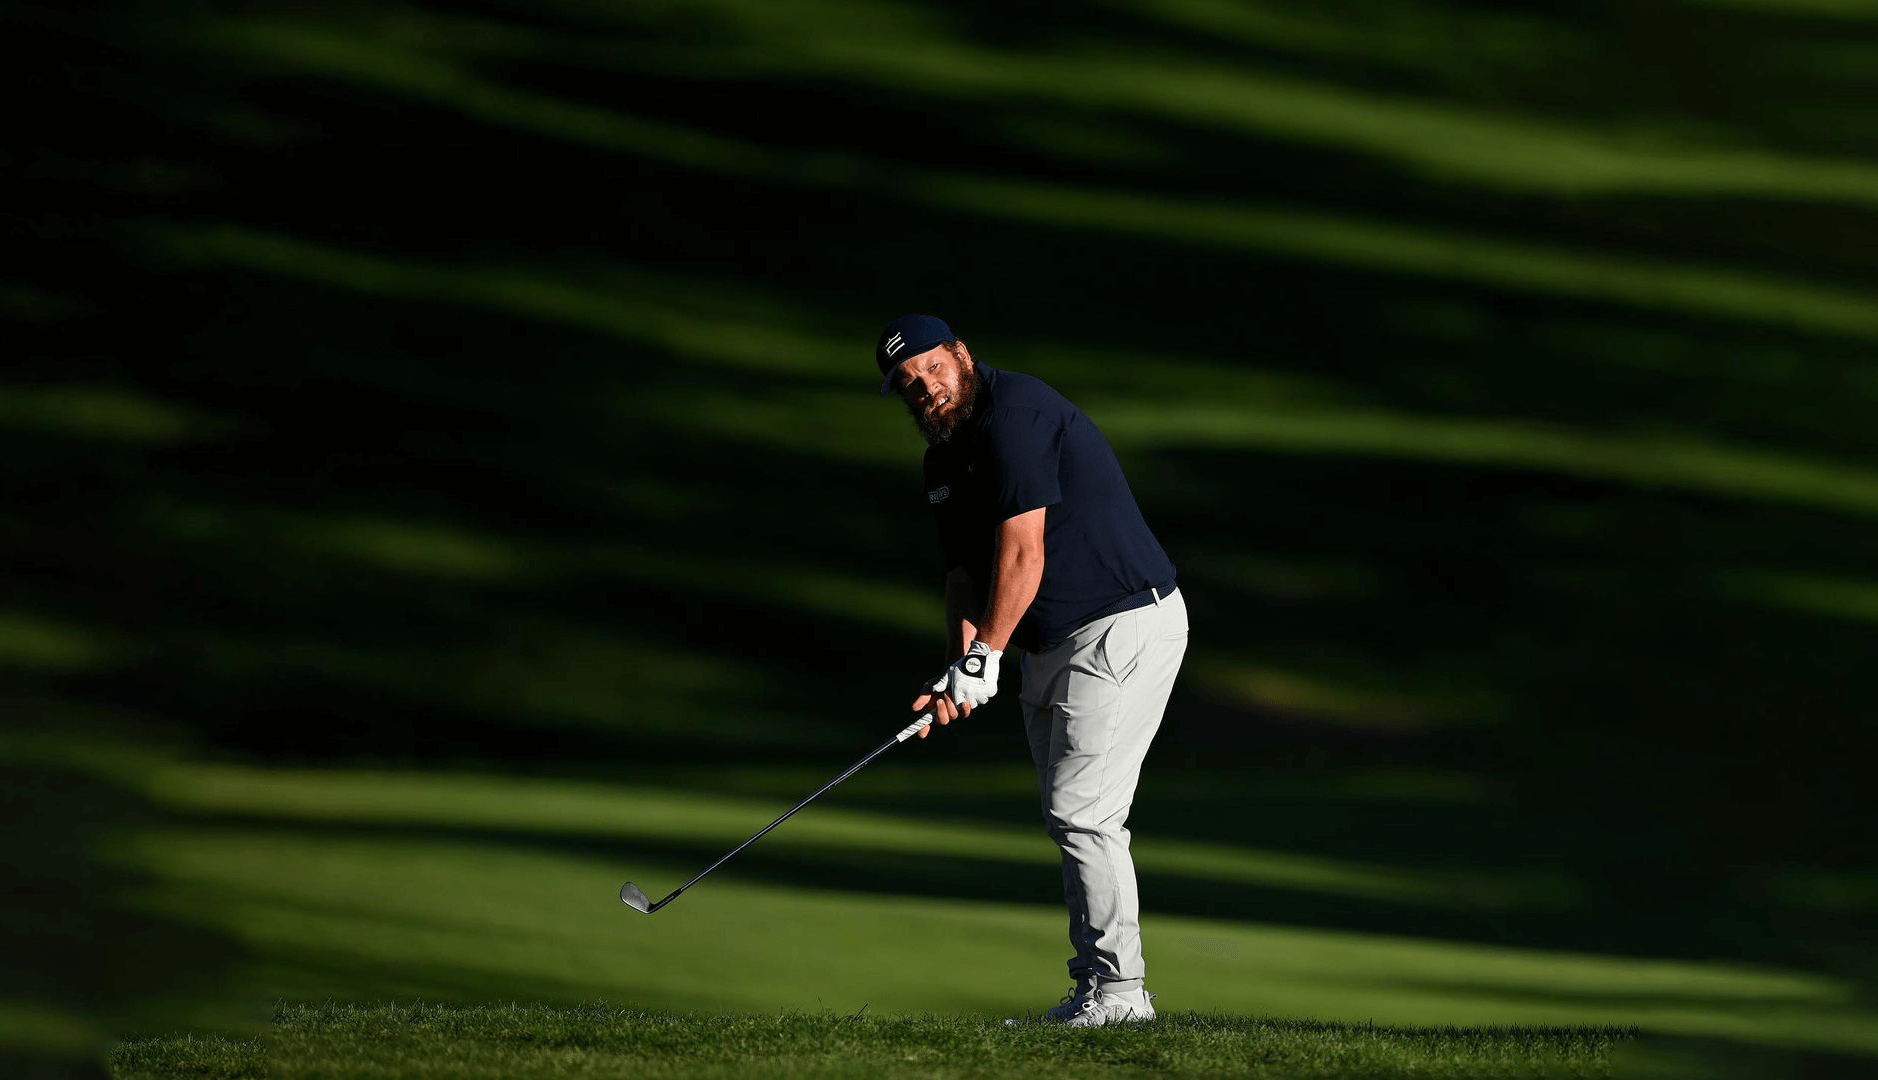 Get to know Andrew "Beef" Johnston